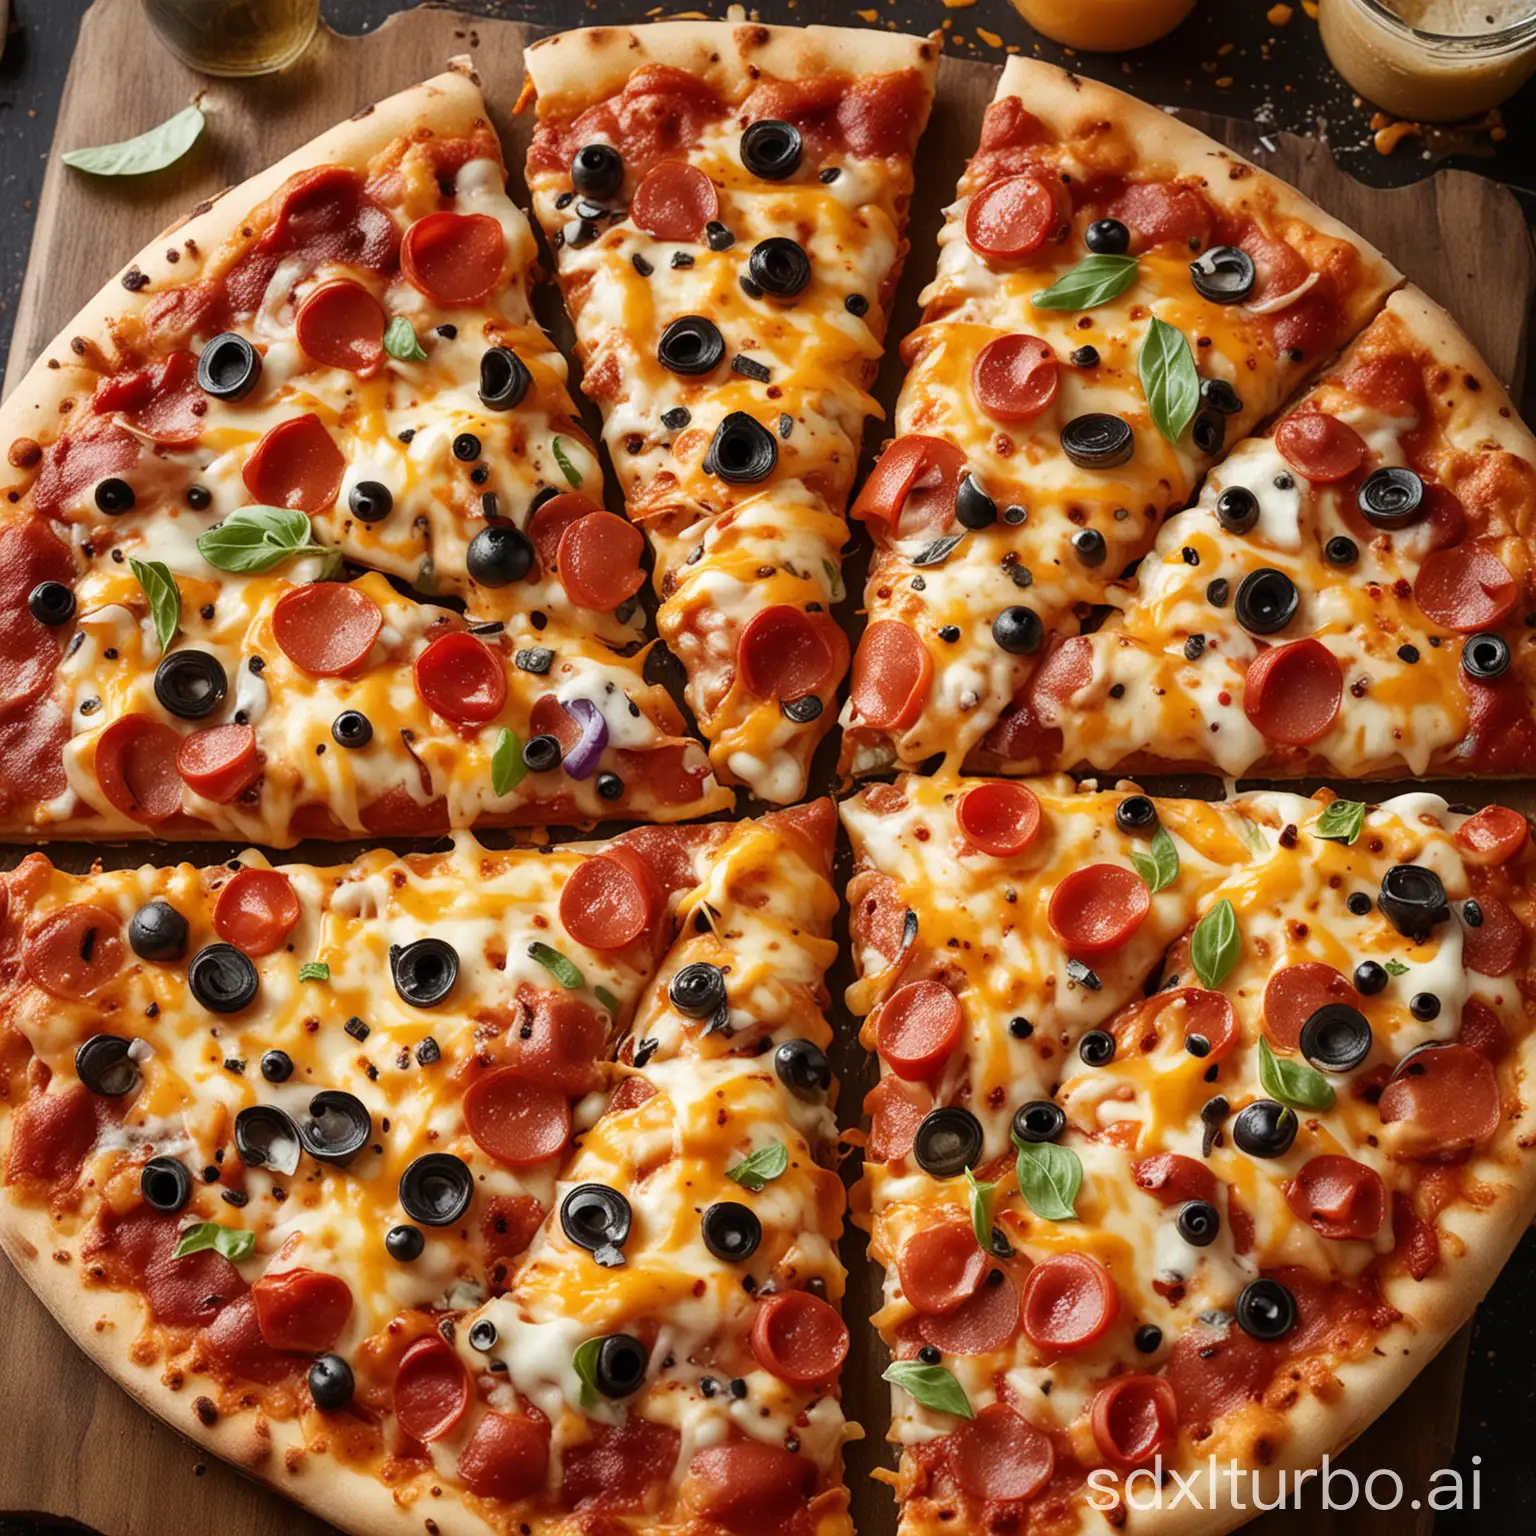 A close-up image of a hot and cheesy pizza, with melted cheese and colorful toppings.